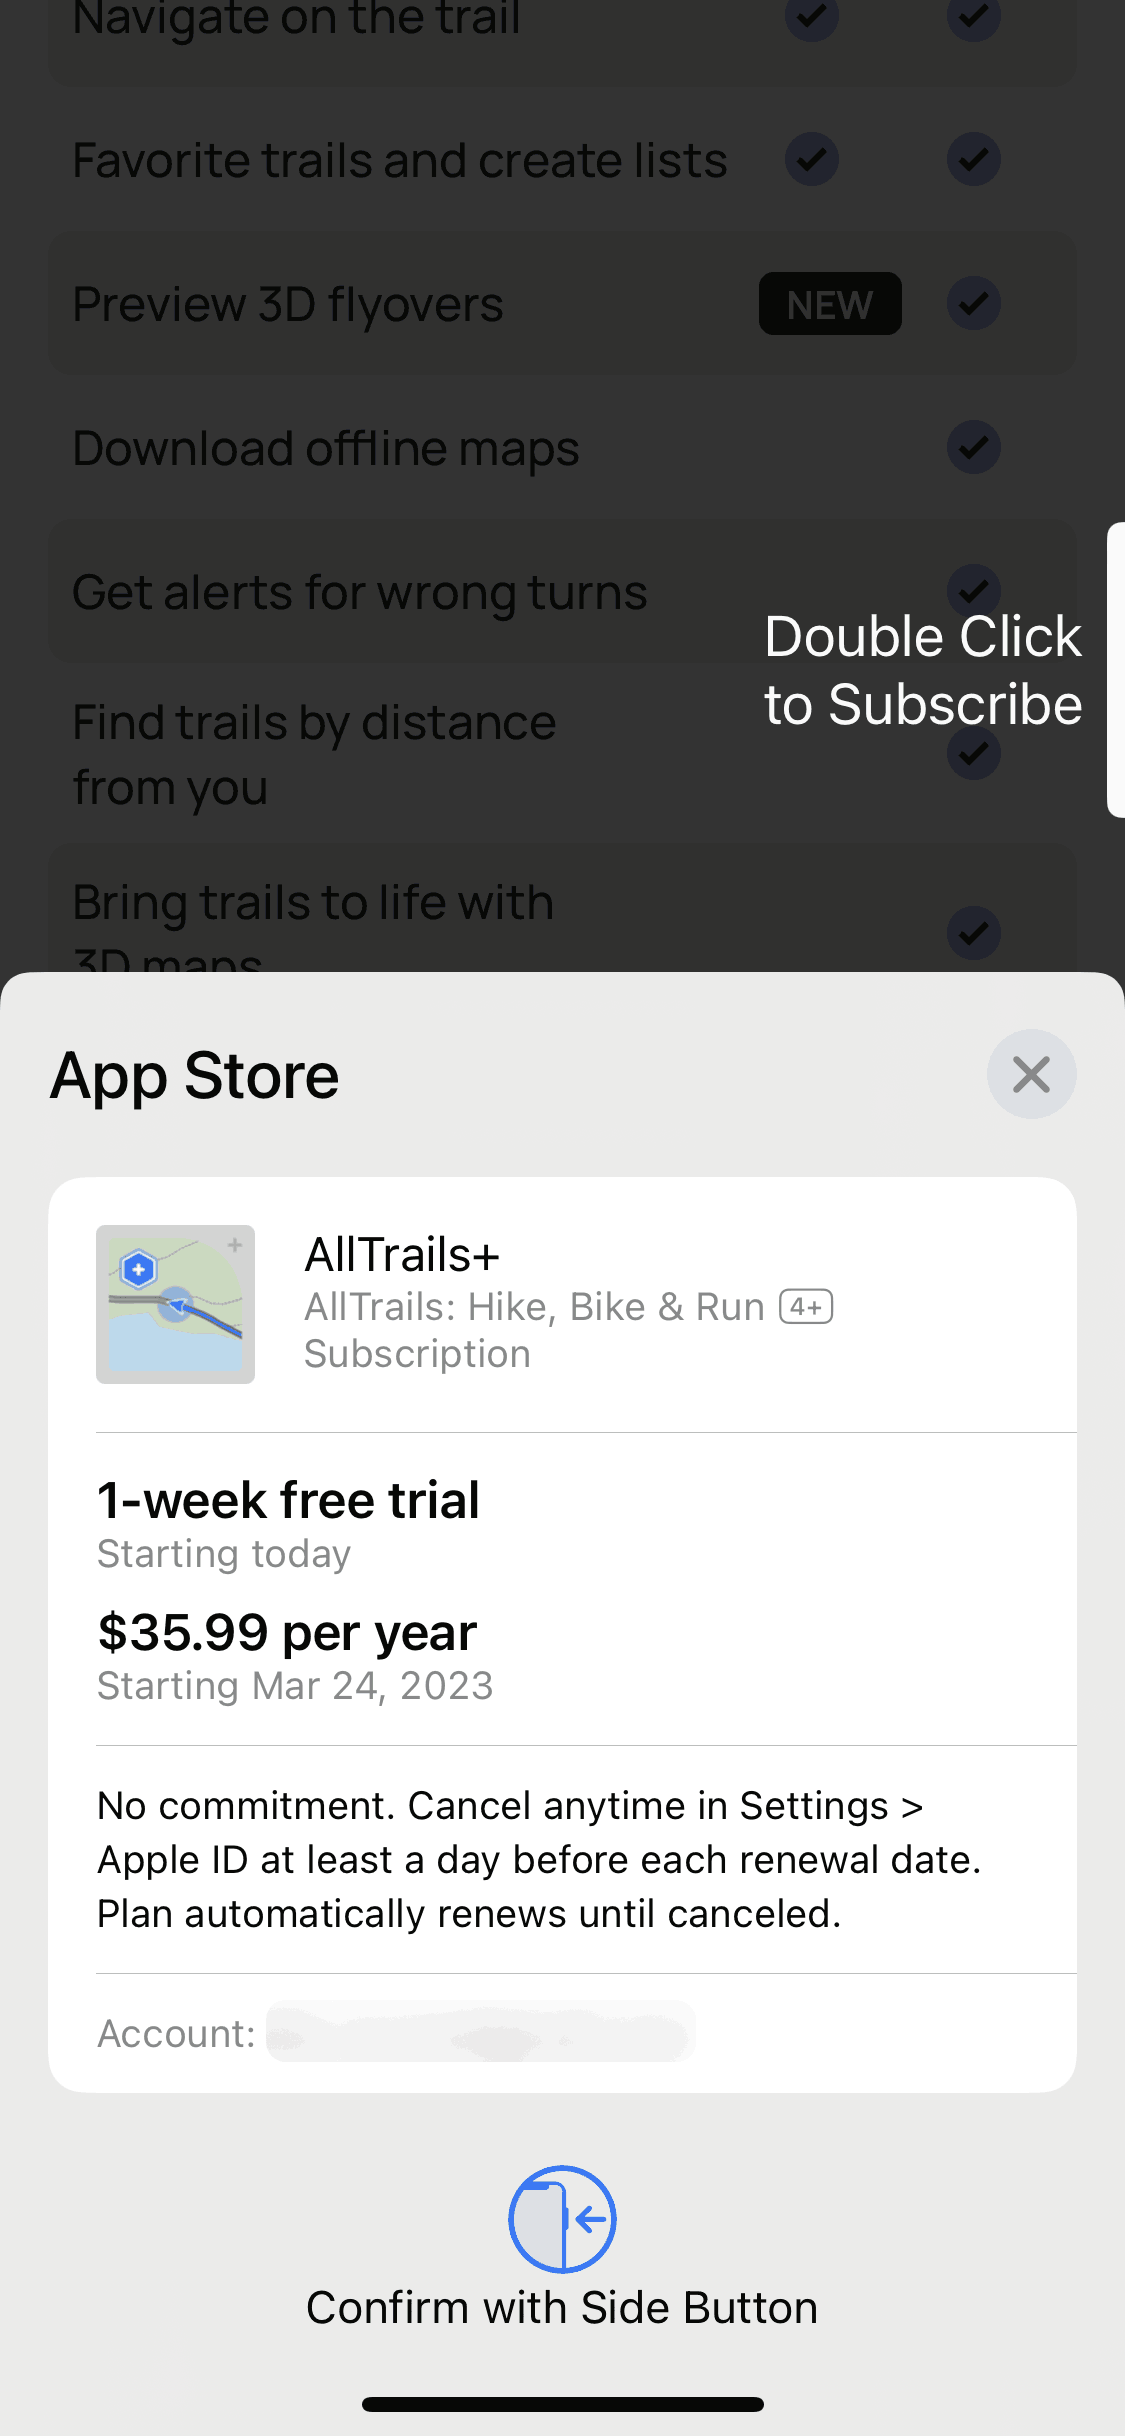 AllTrails download the new for apple